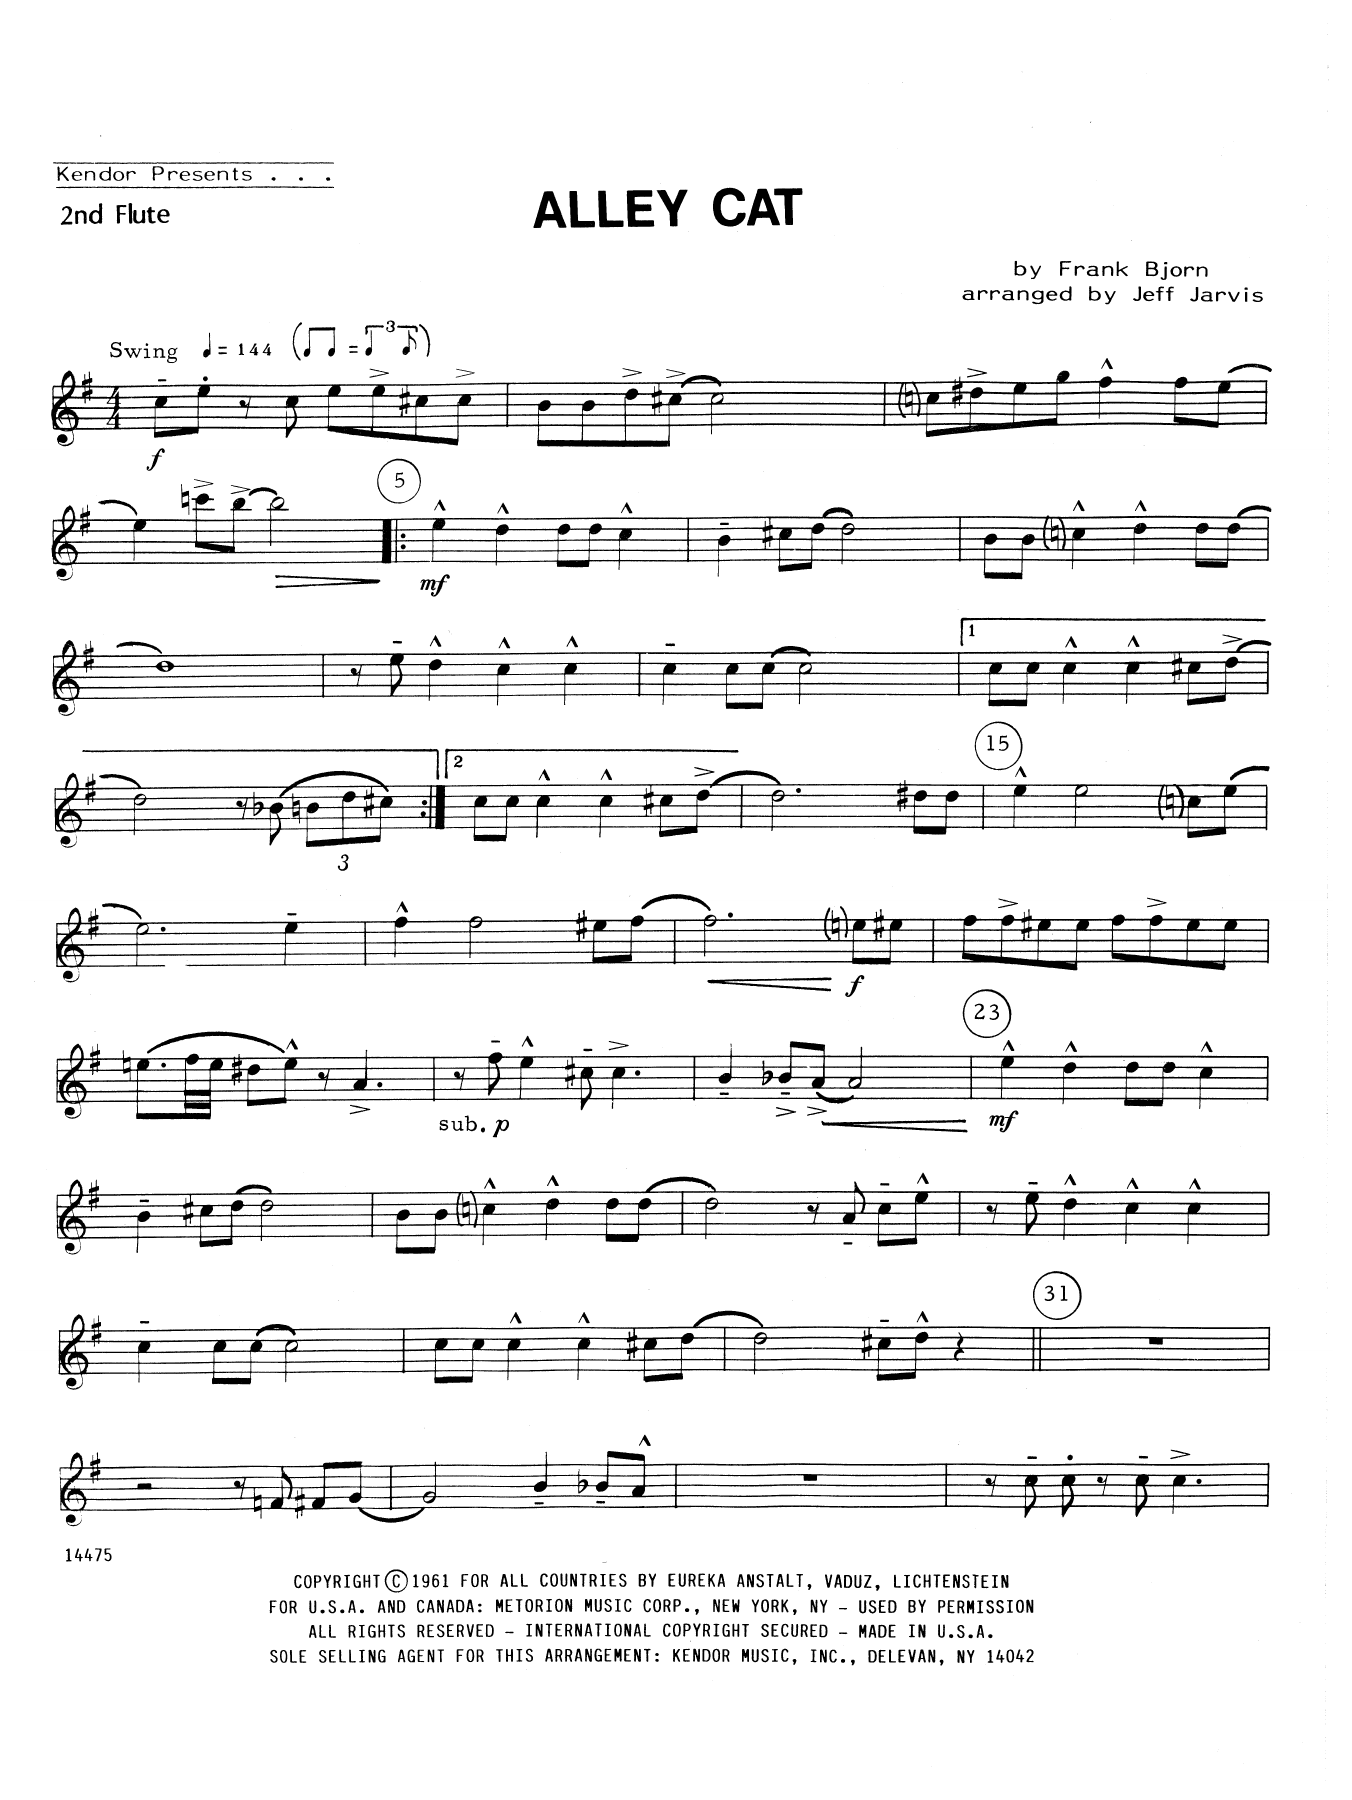 Download Jeff Jarvis Alley Cat - 2nd Flute Sheet Music